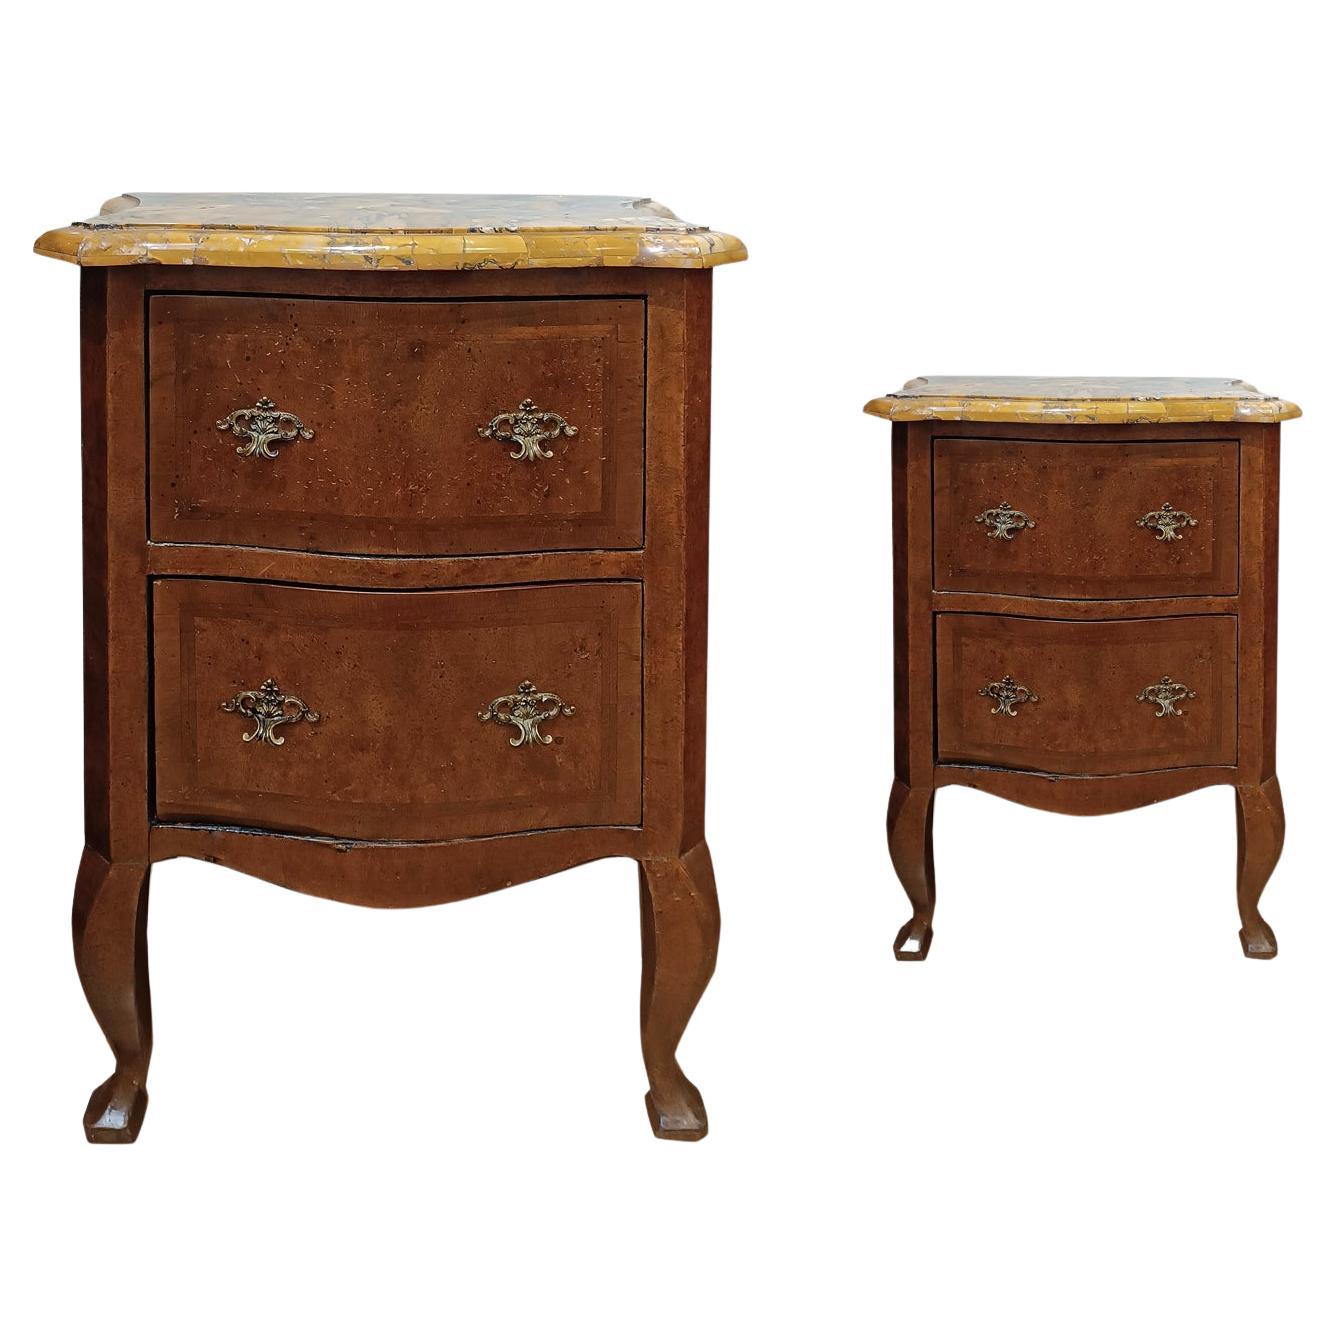 18th CENTURY PAIR OF LOUIS XV BEDSIDE TABLES For Sale